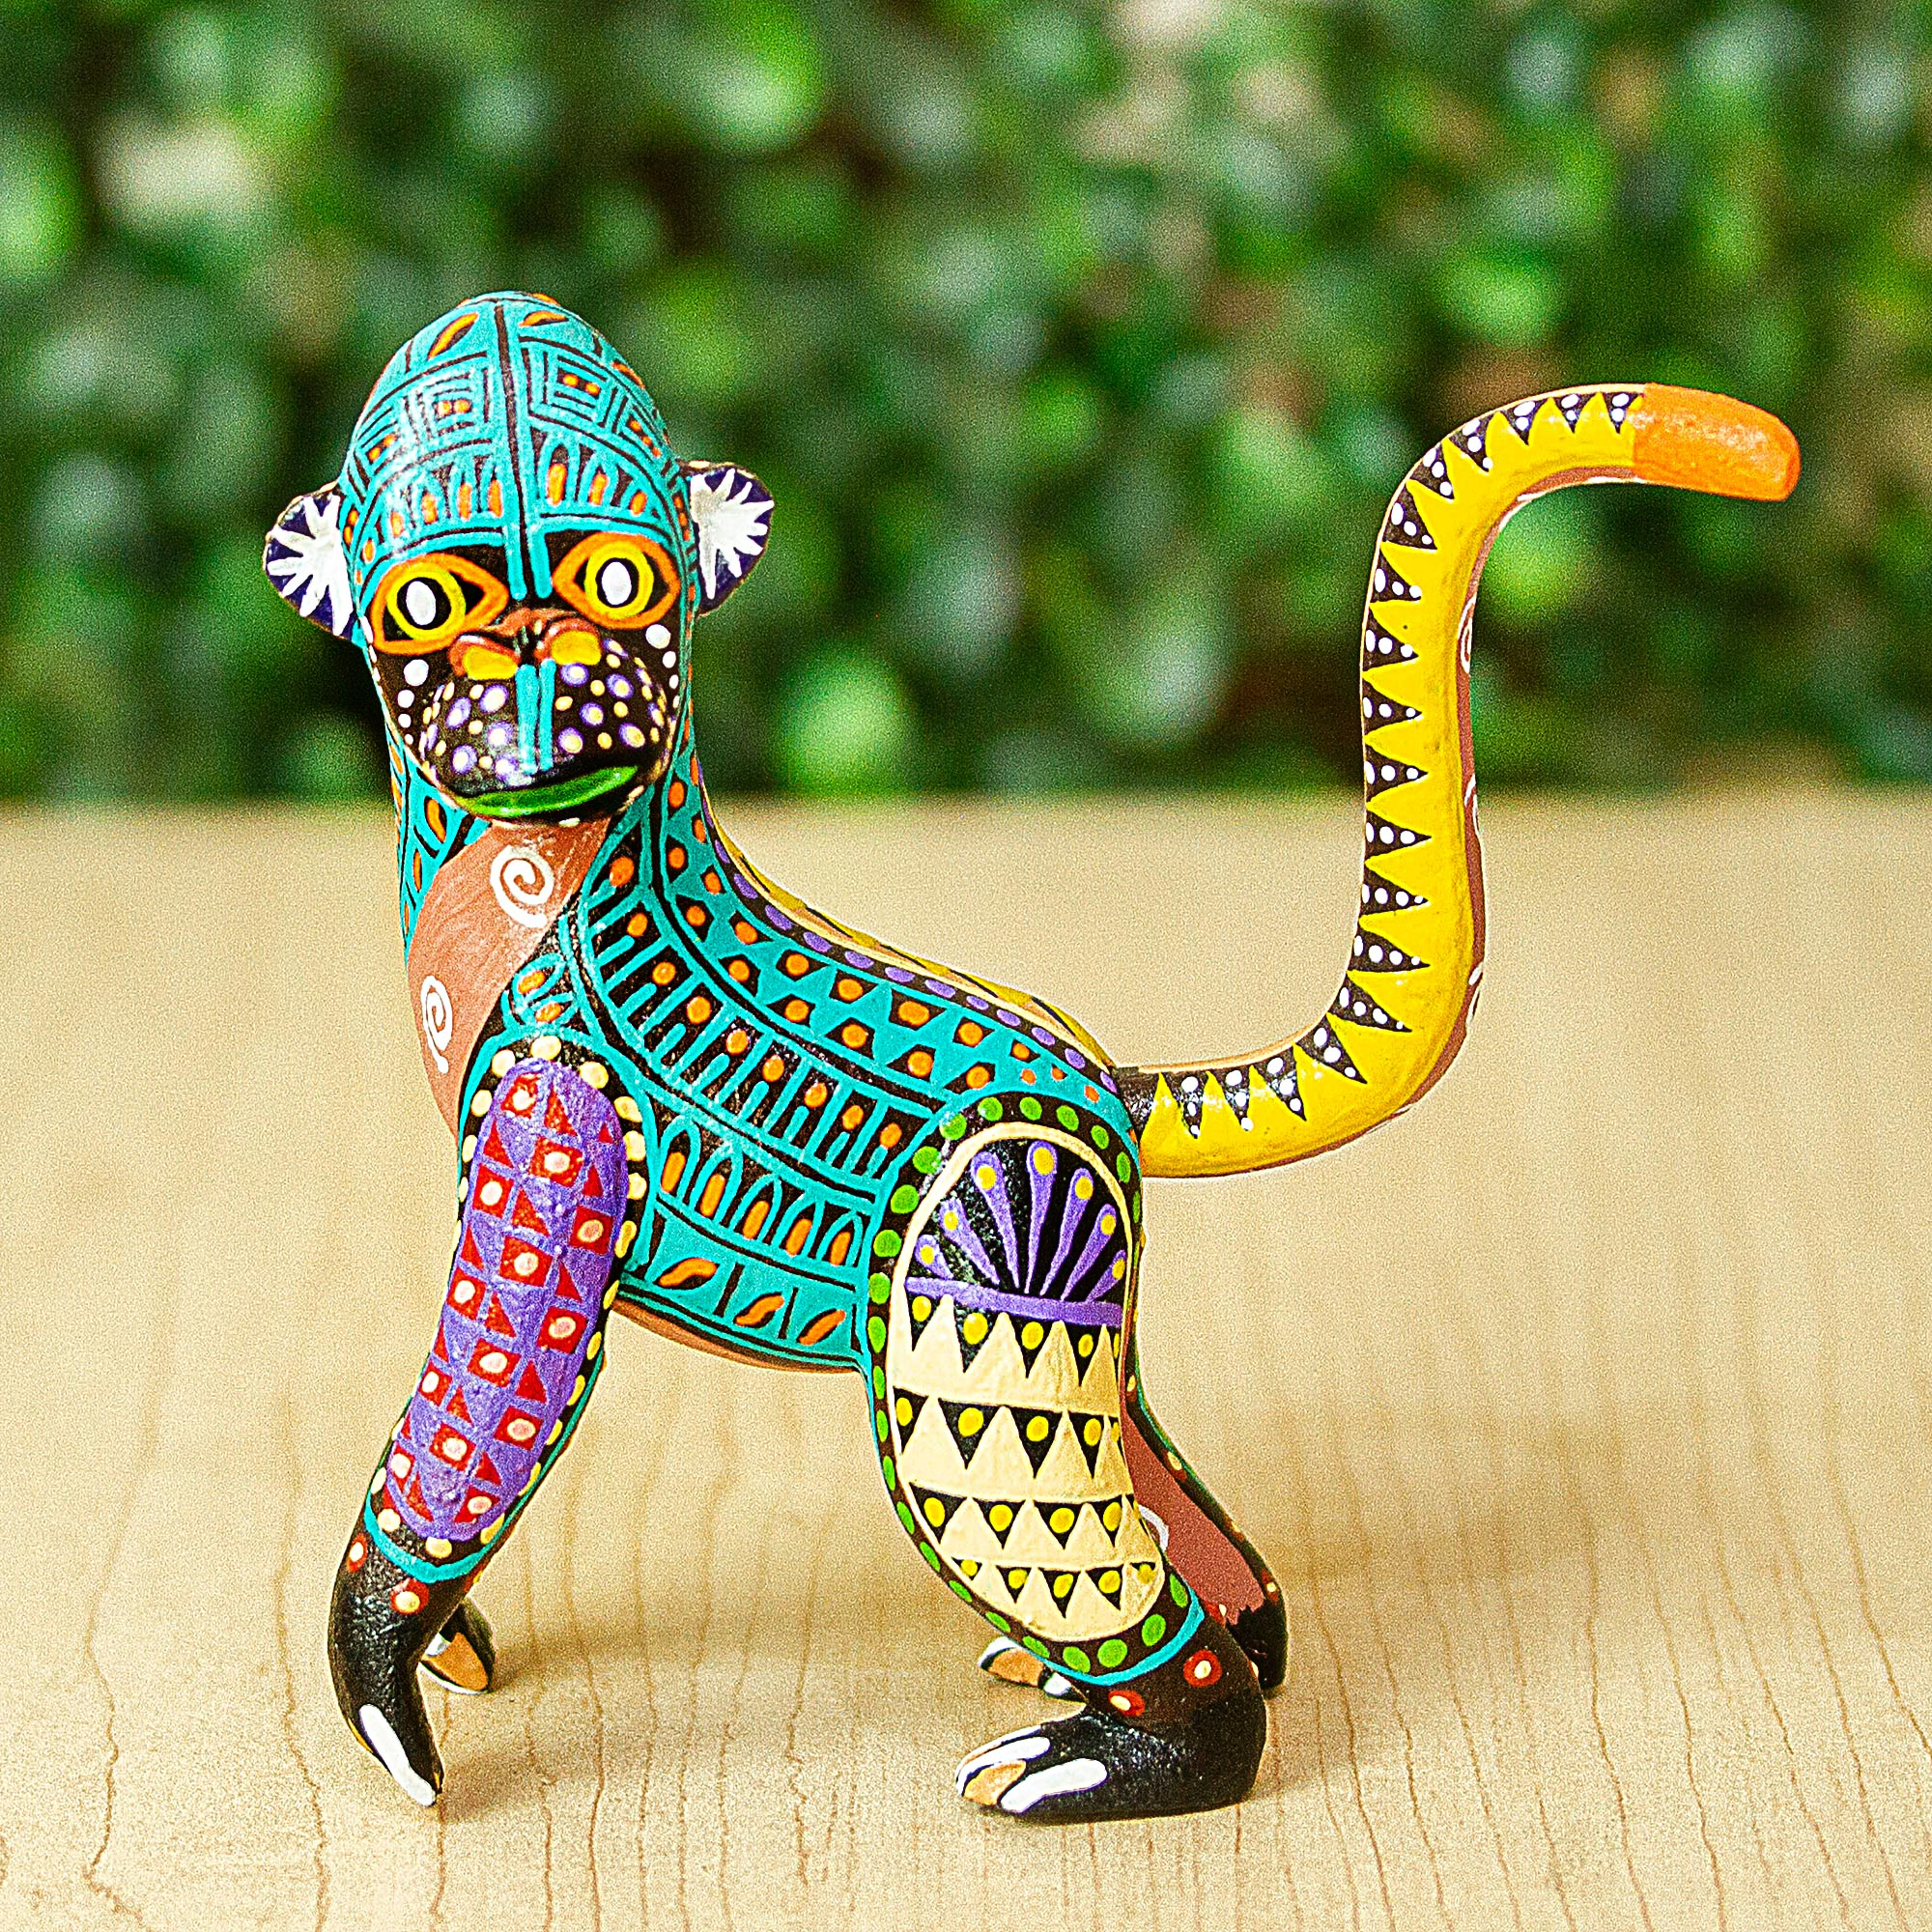 The Story Making Headlines in the World of Alebrijes!